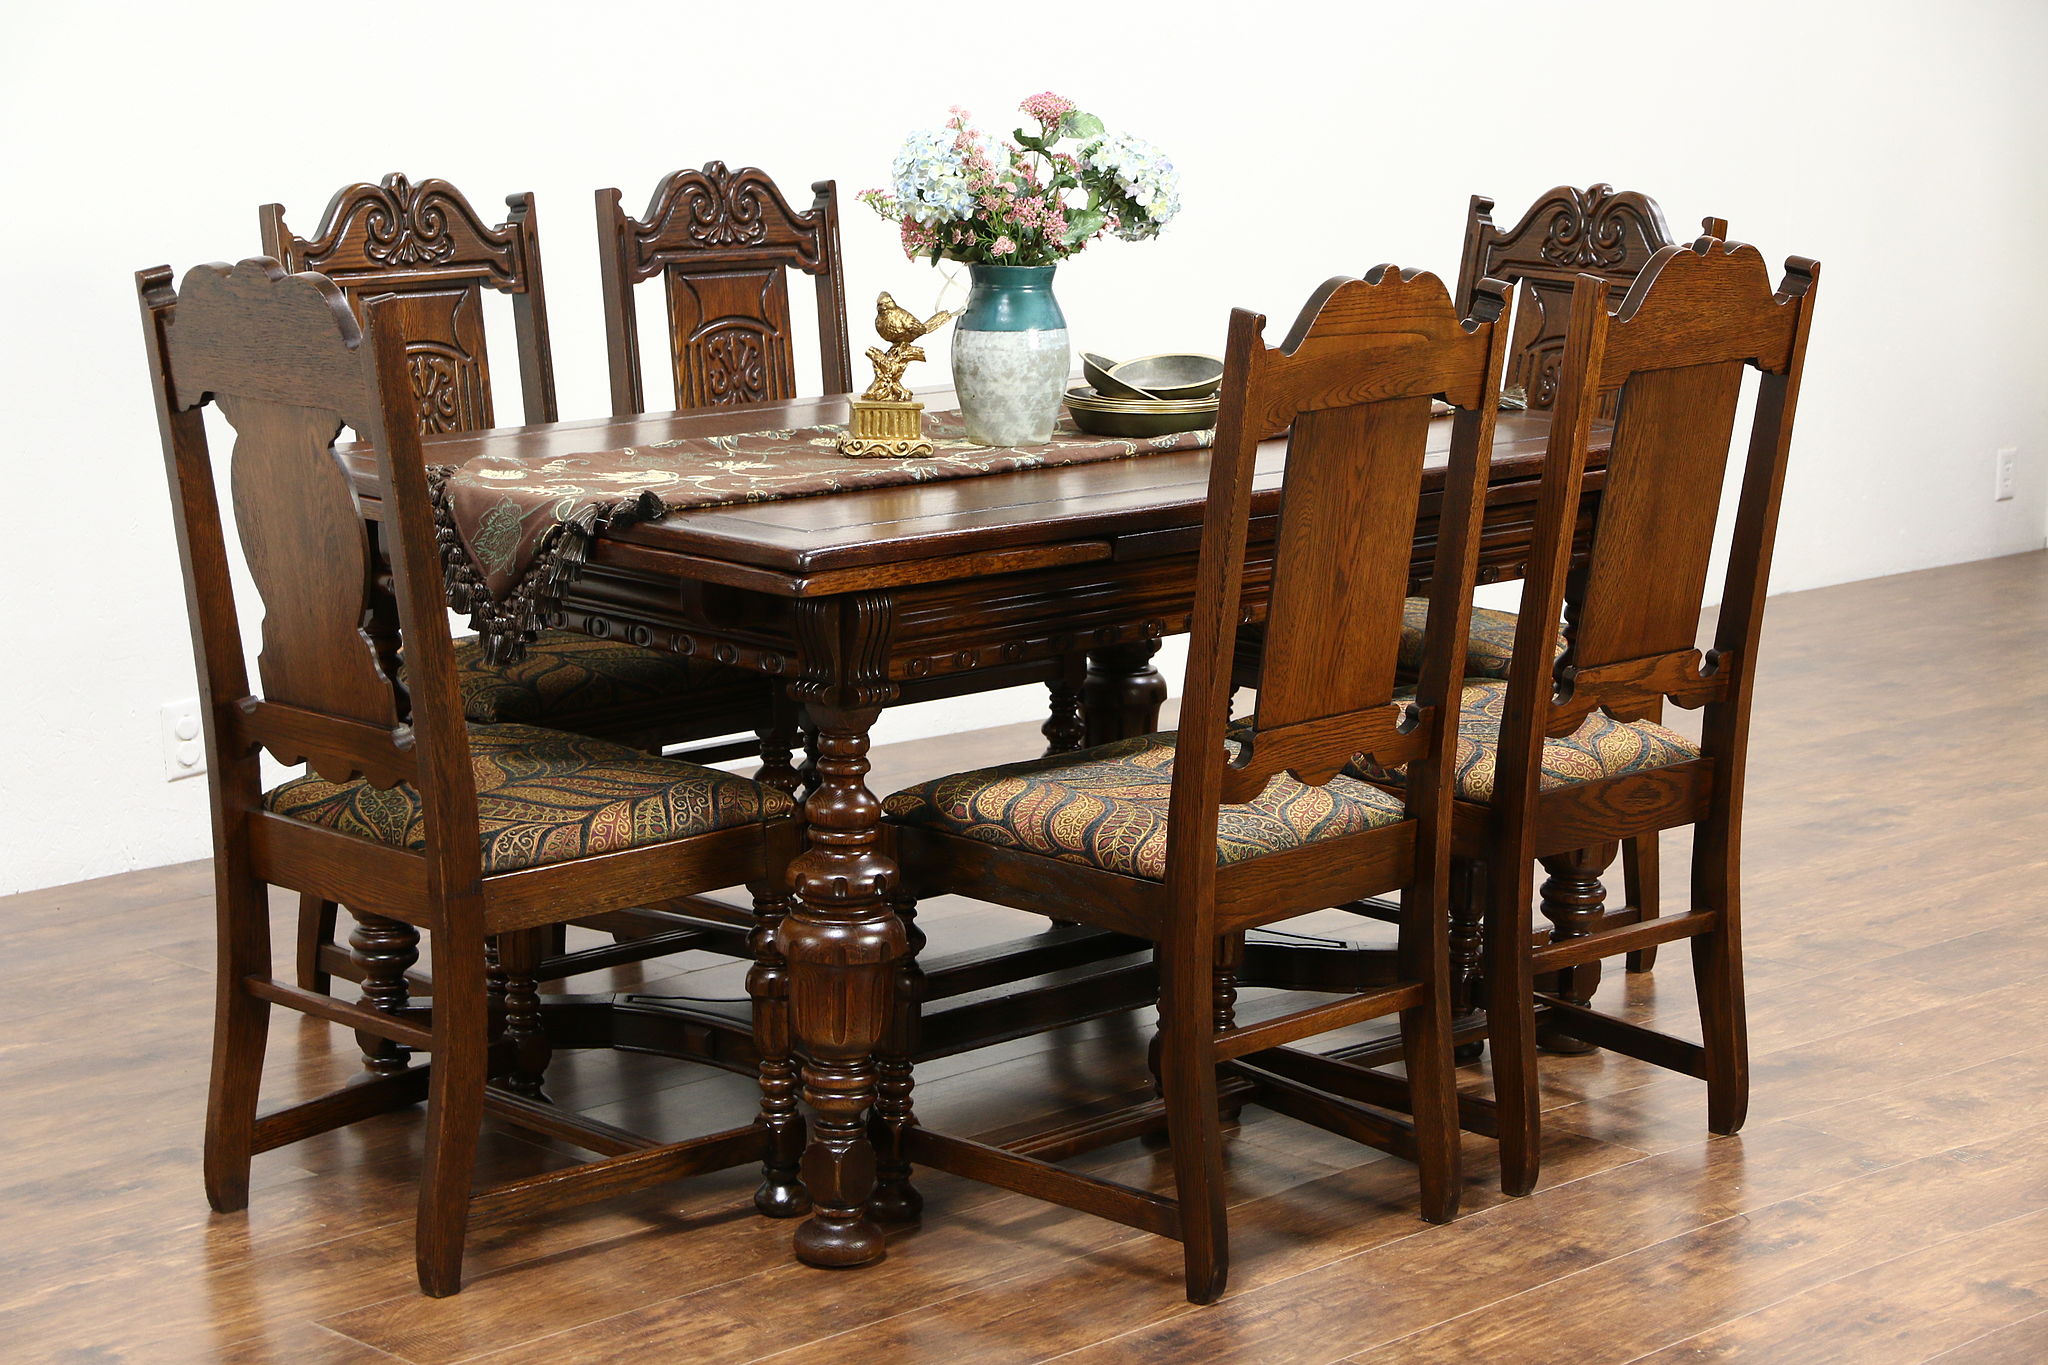 Sold Tudor 1925 Antique Carved Oak Dining Set Table 6 Chairs New Upholstery Harp Gallery Antiques Furniture